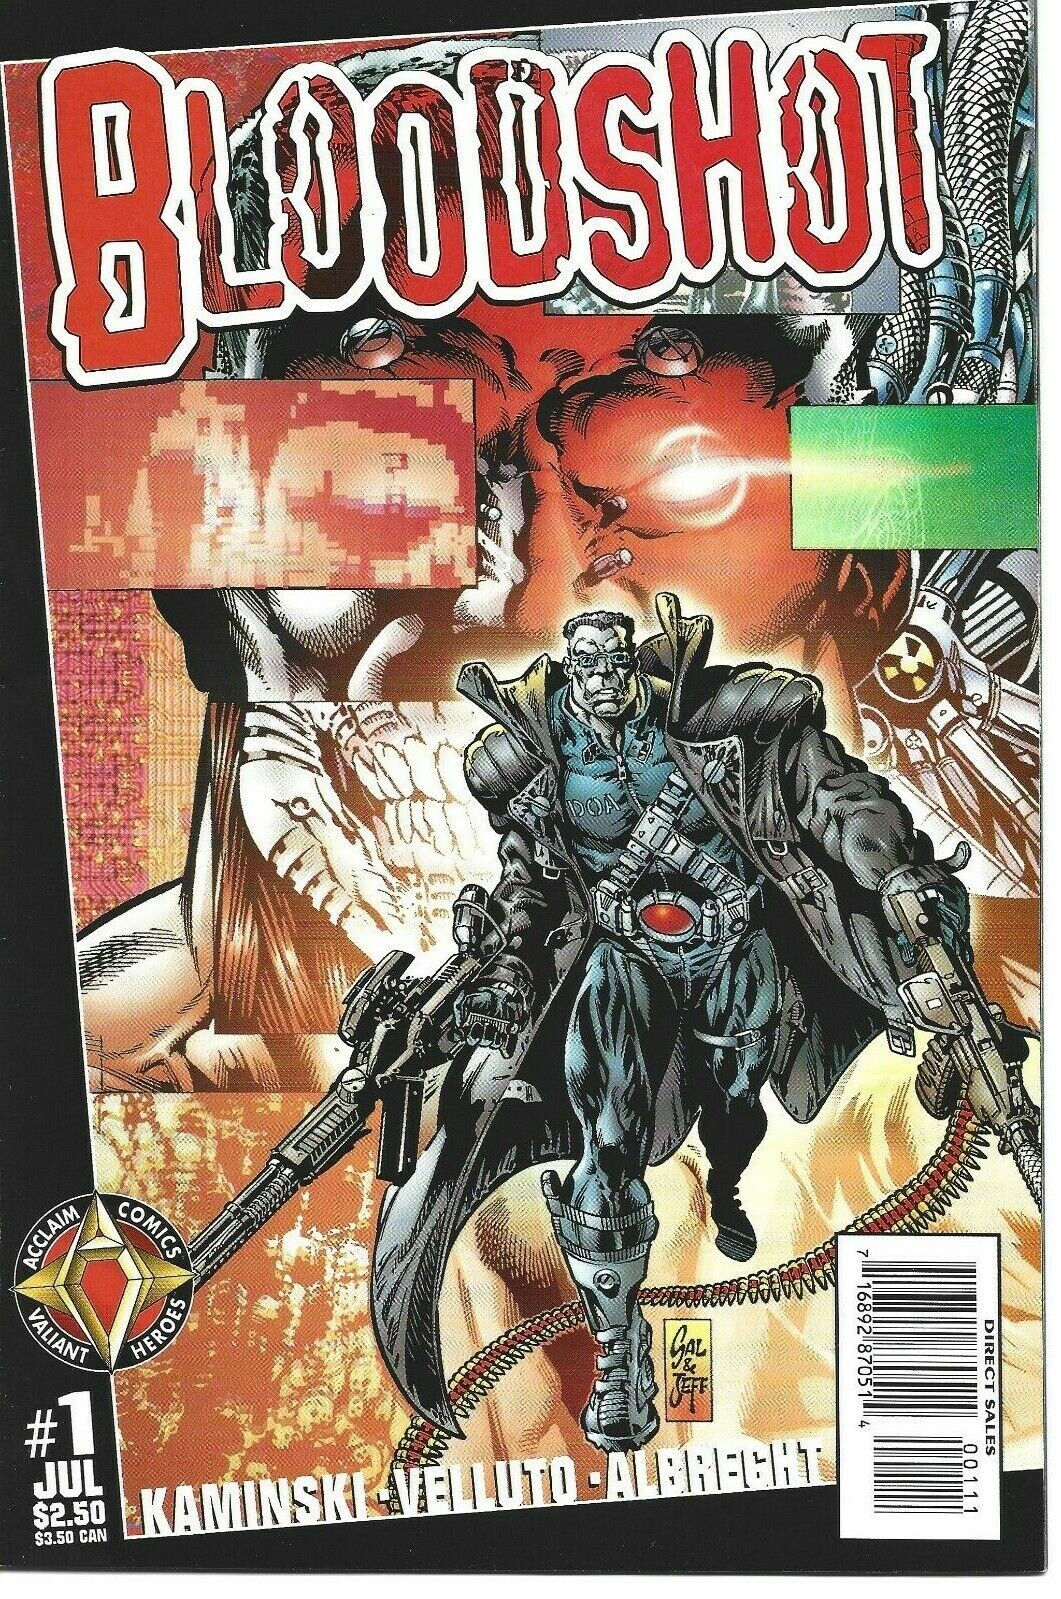 BLOODSHOT #1 ACCLAIM COMICS 1997 BAGGED AND BOARDED